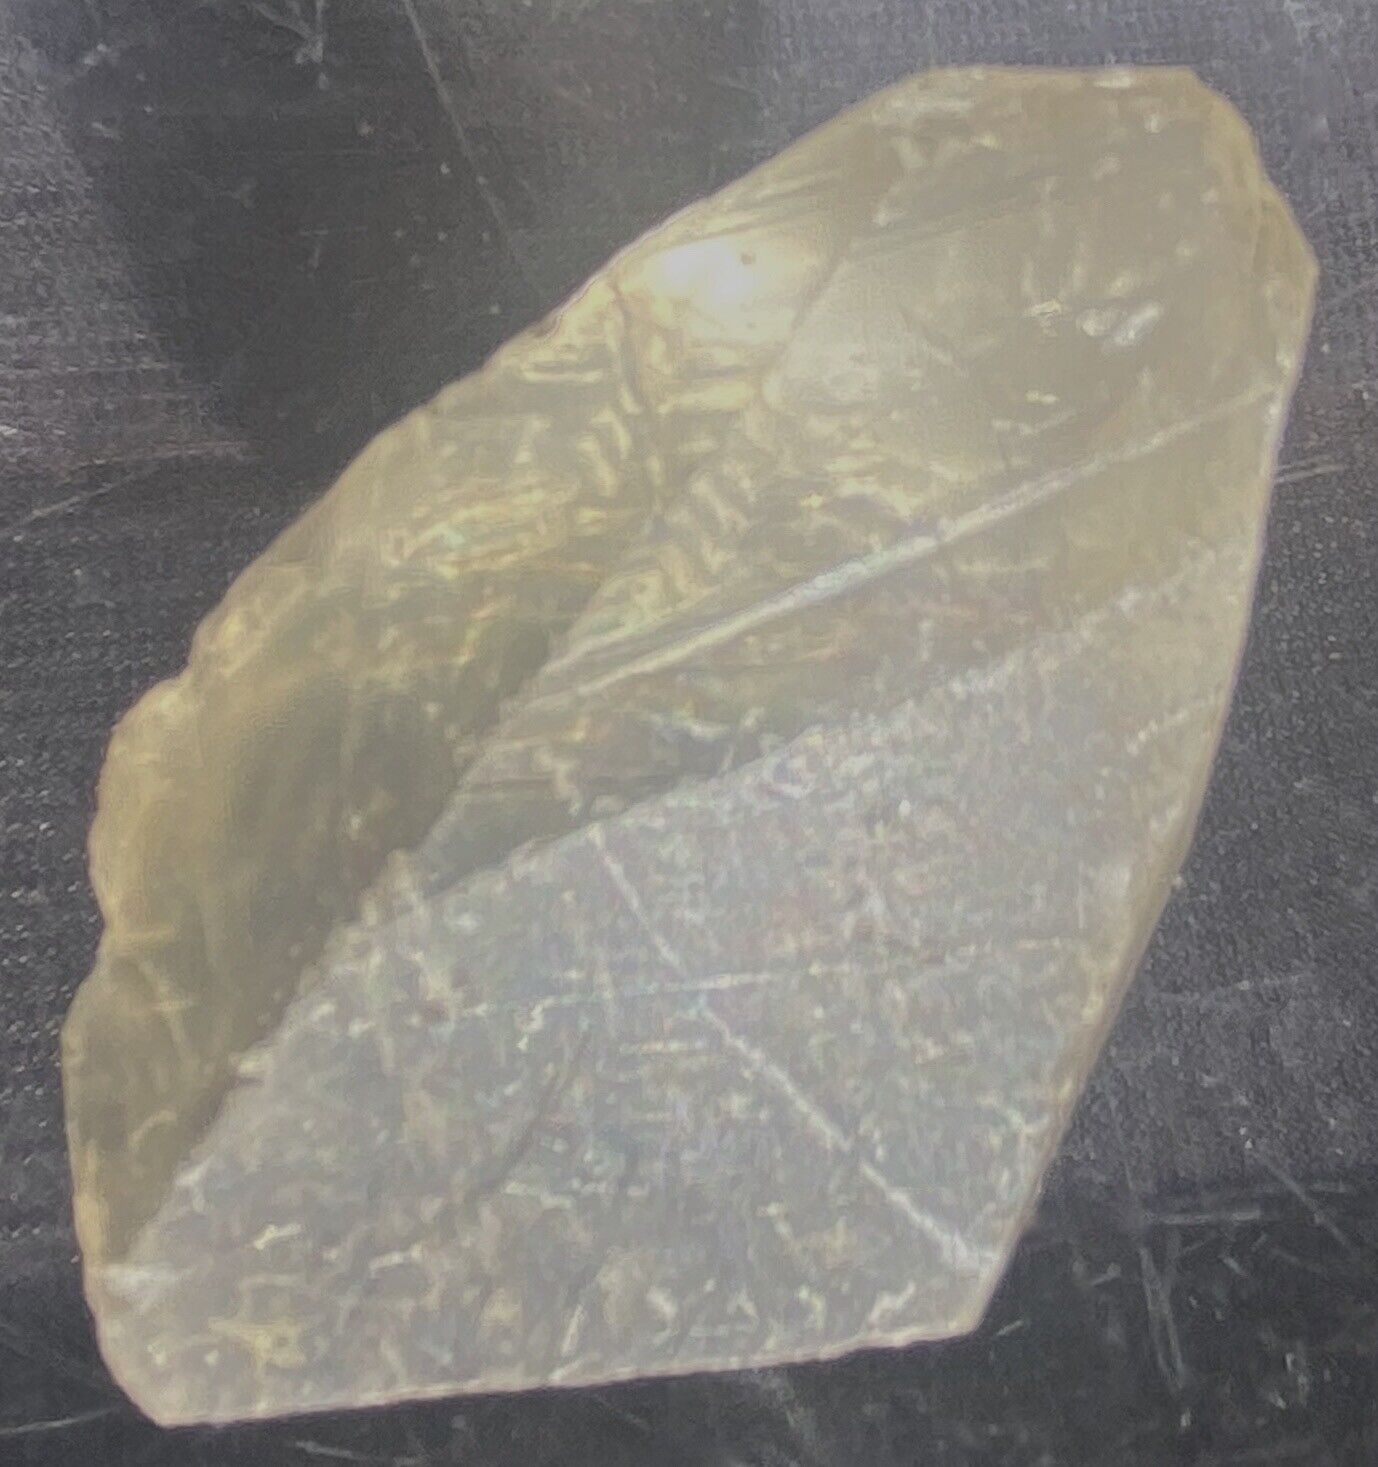 Gold Calcite Crystal Clear Terminated Points Glowing Jewel 48 Grams -242 Carats